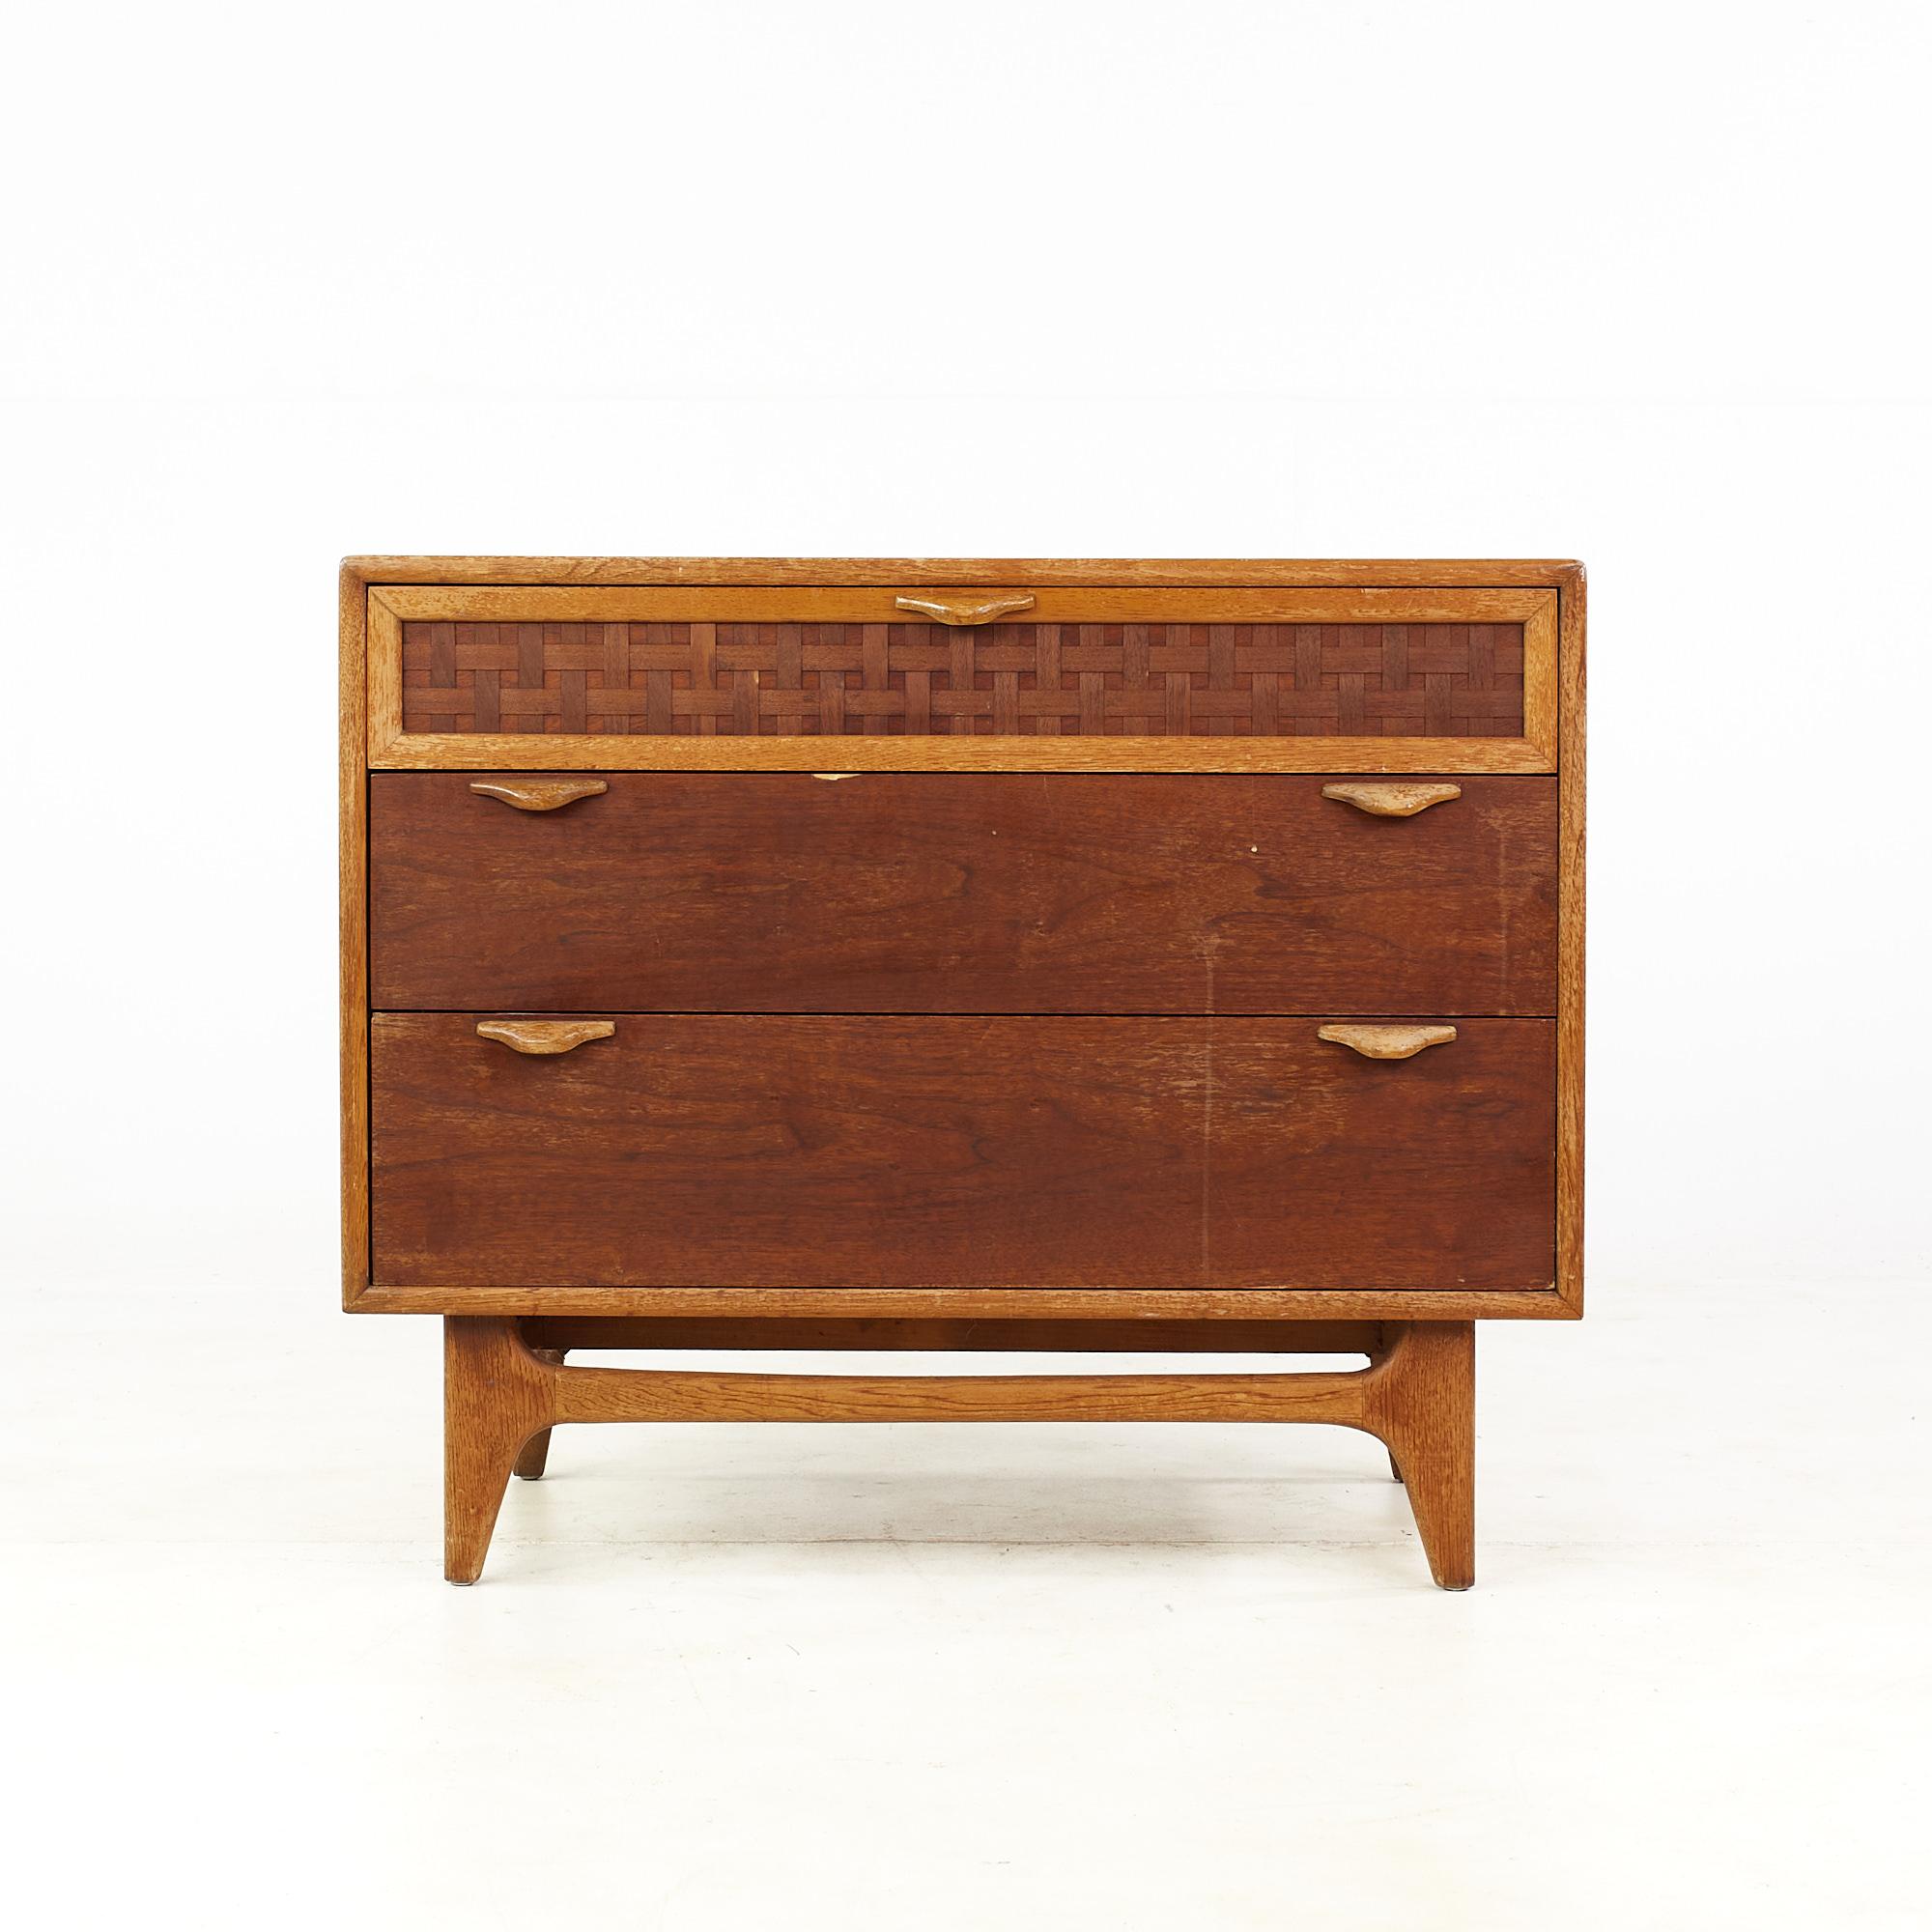 Warren Church for Lane Perception mid century walnut single nightstand

This nightstand measures: 36 wide x 19 deep x 30 inches high

All pieces of furniture can be had in what we call restored vintage condition. That means the piece is restored